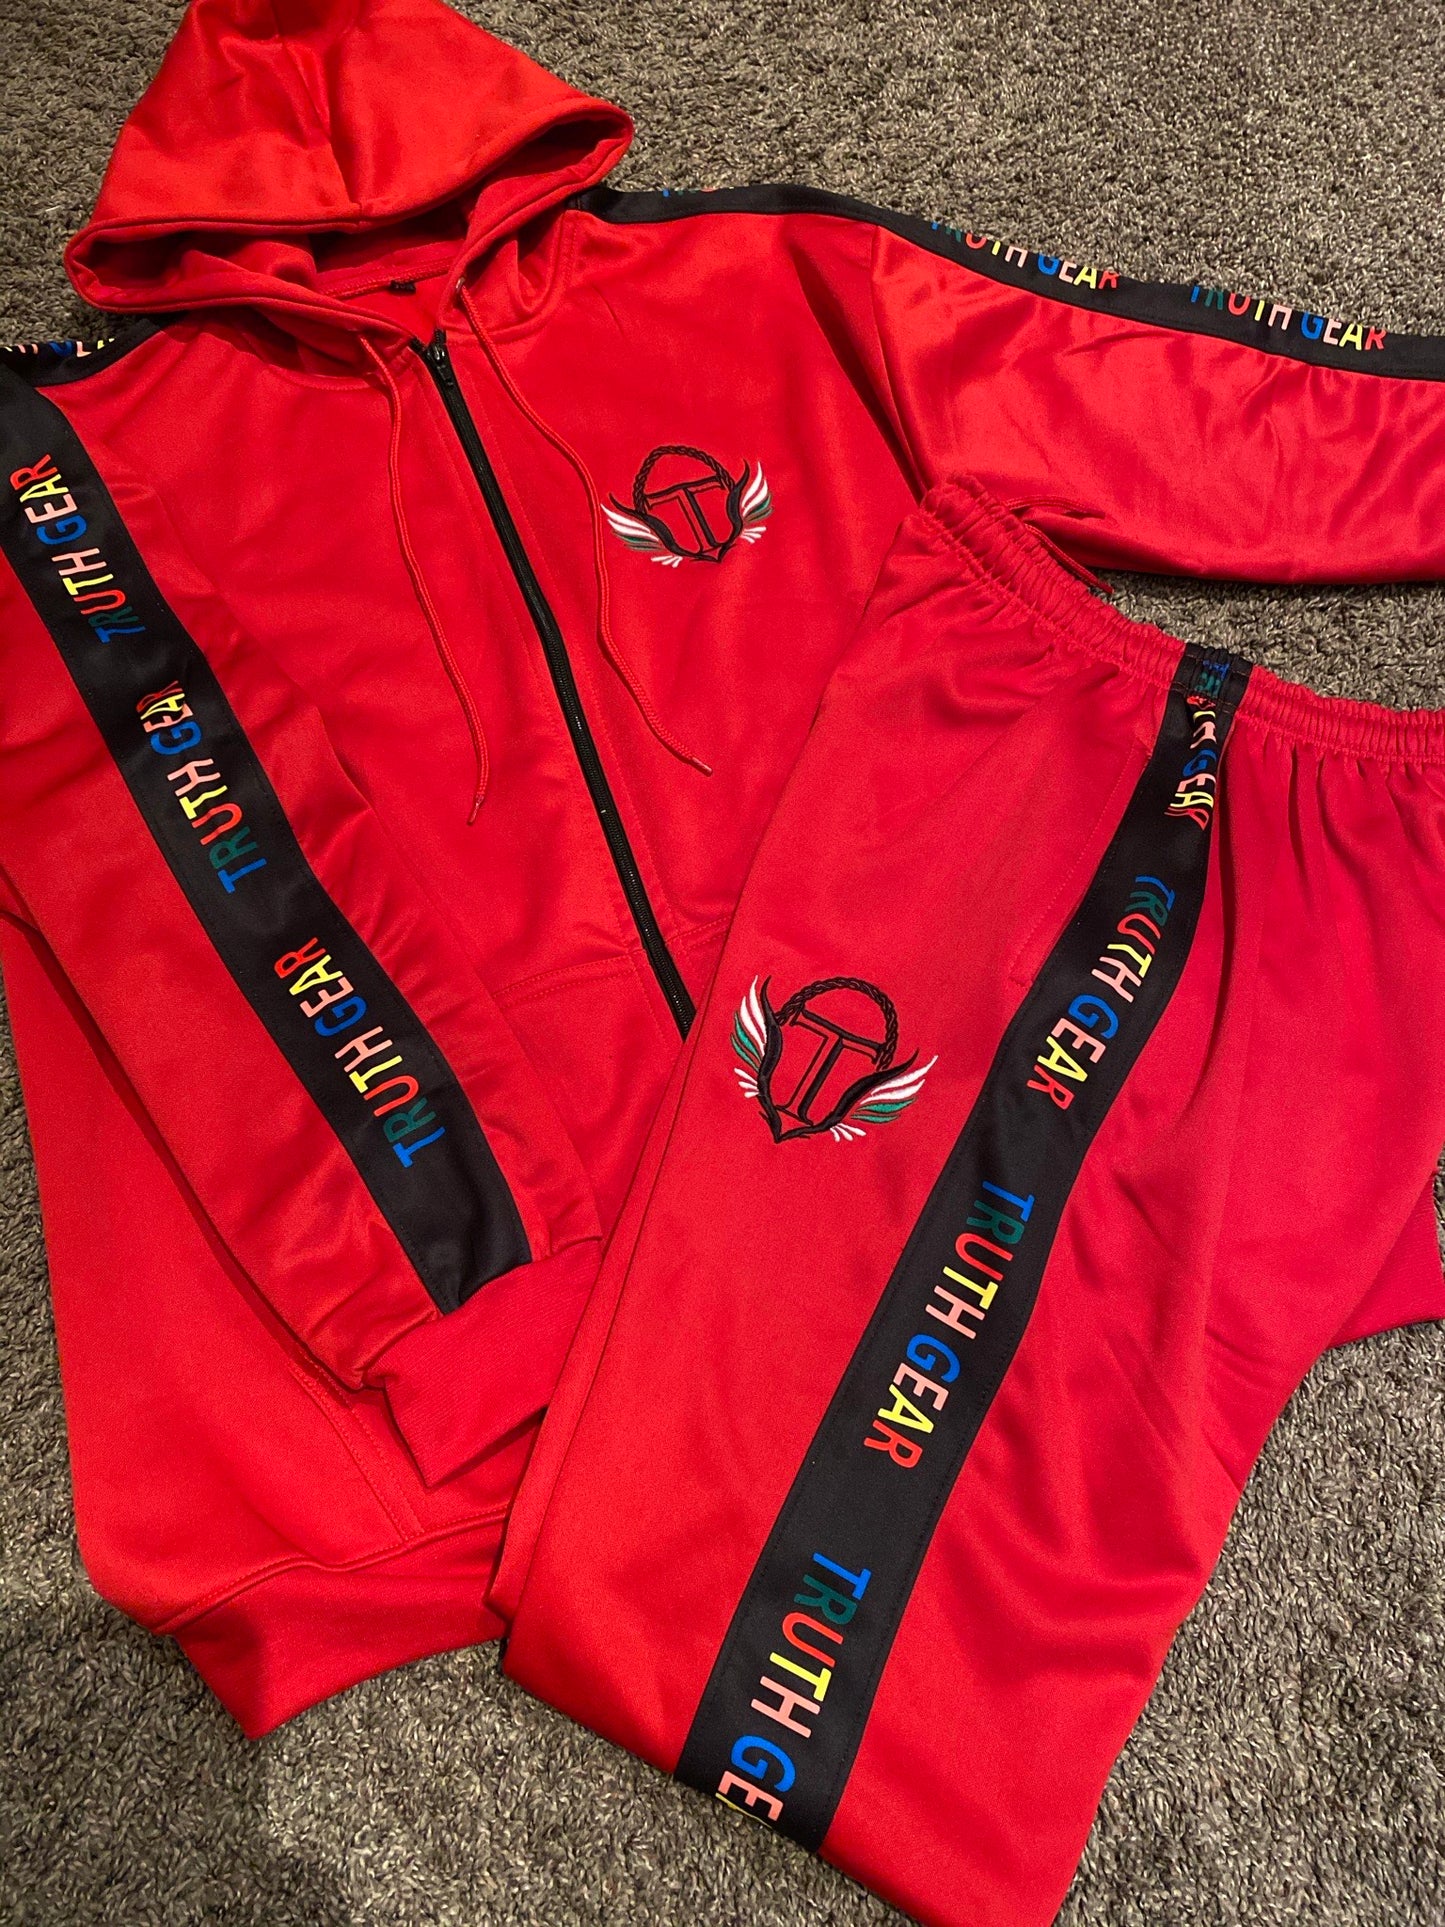 Truth Gear Track Suit Sets.